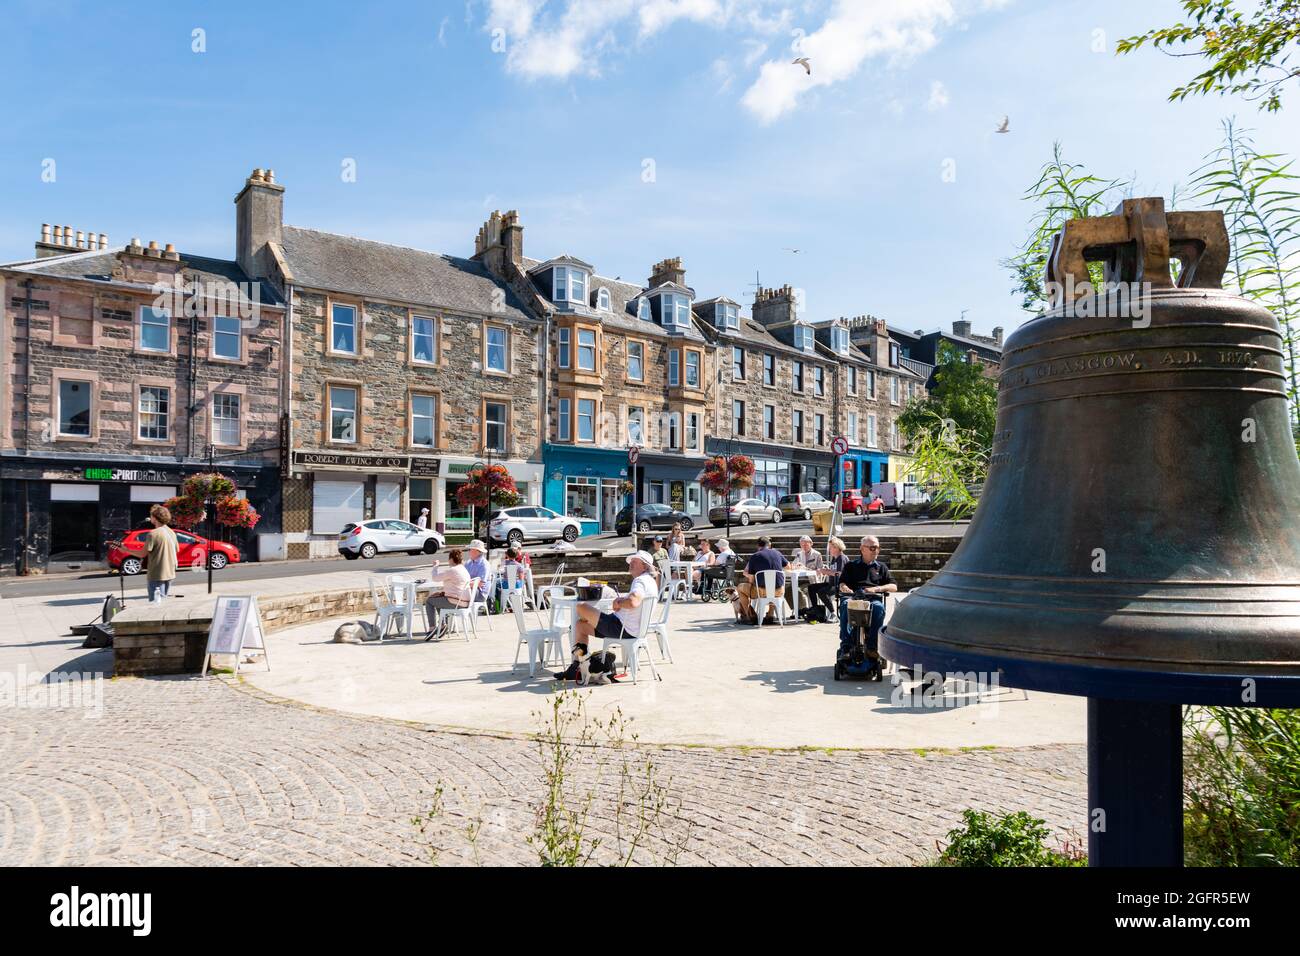 Amphitheatre alfresco area on Montague Street at junction with High Street, Rothesay, Isle of Bute, Argyll and Bute, Scotland, UK Stock Photo